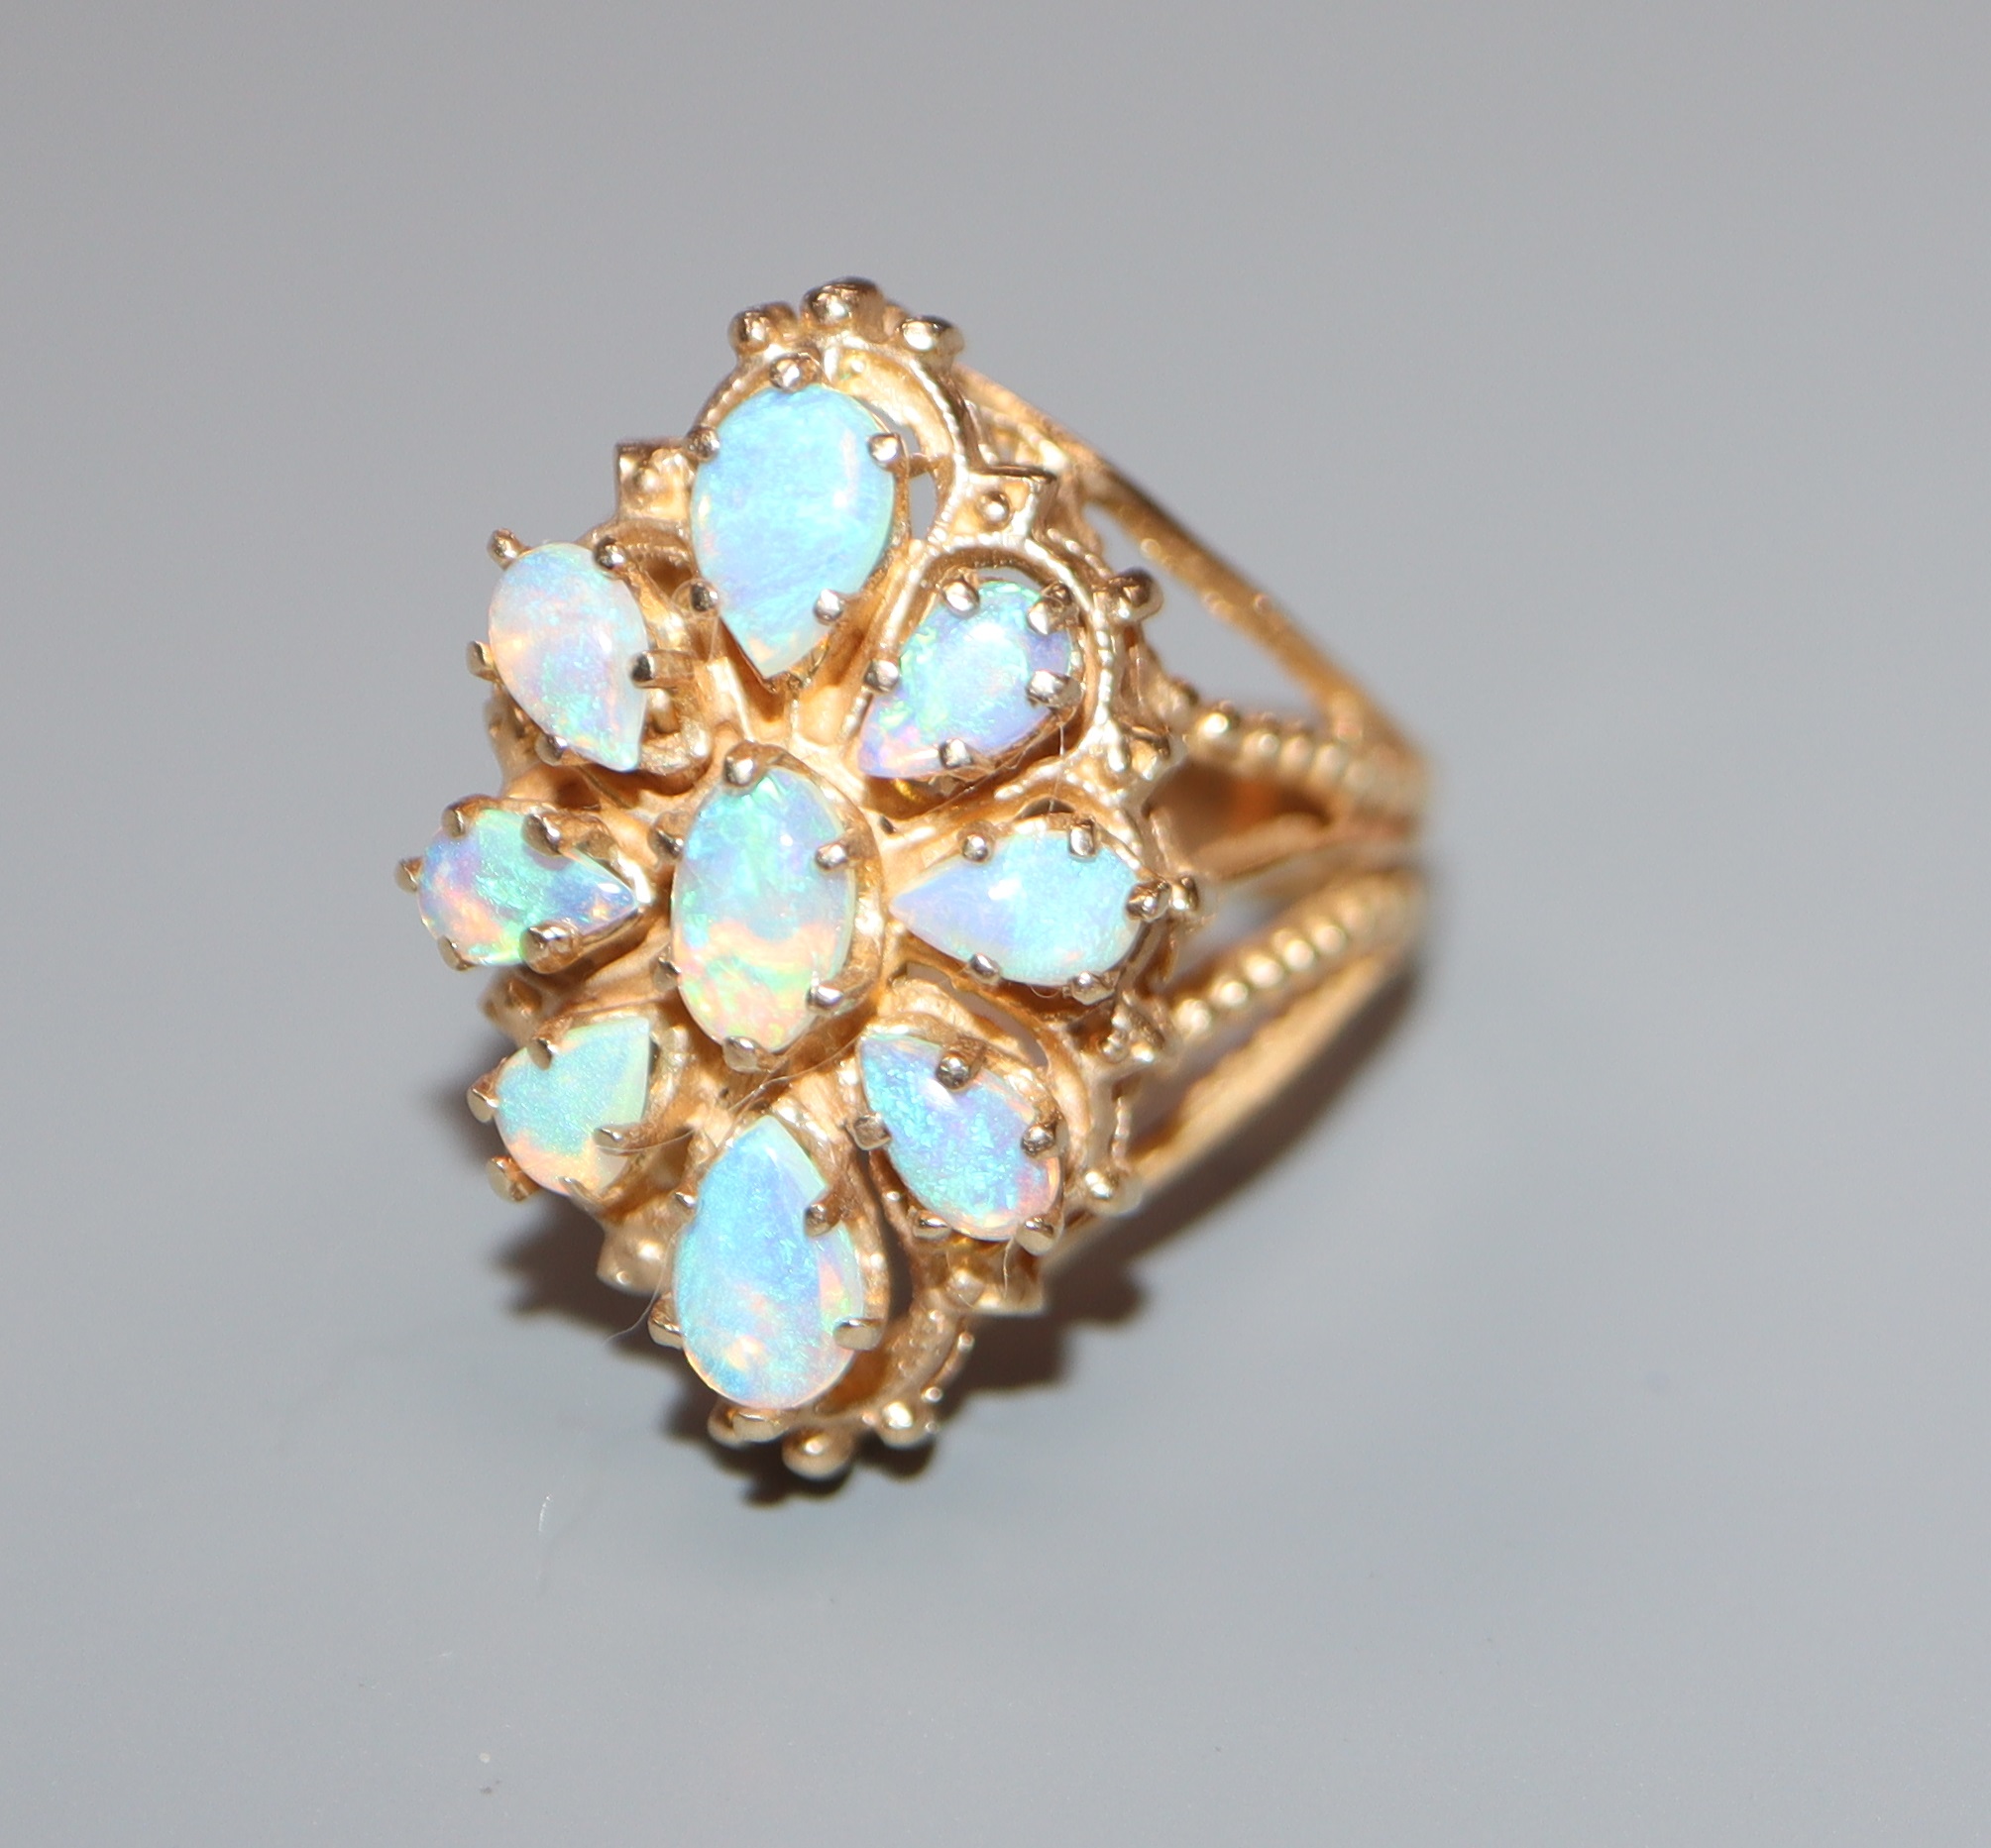 A yellow metal and opal mounted ring, unmarked